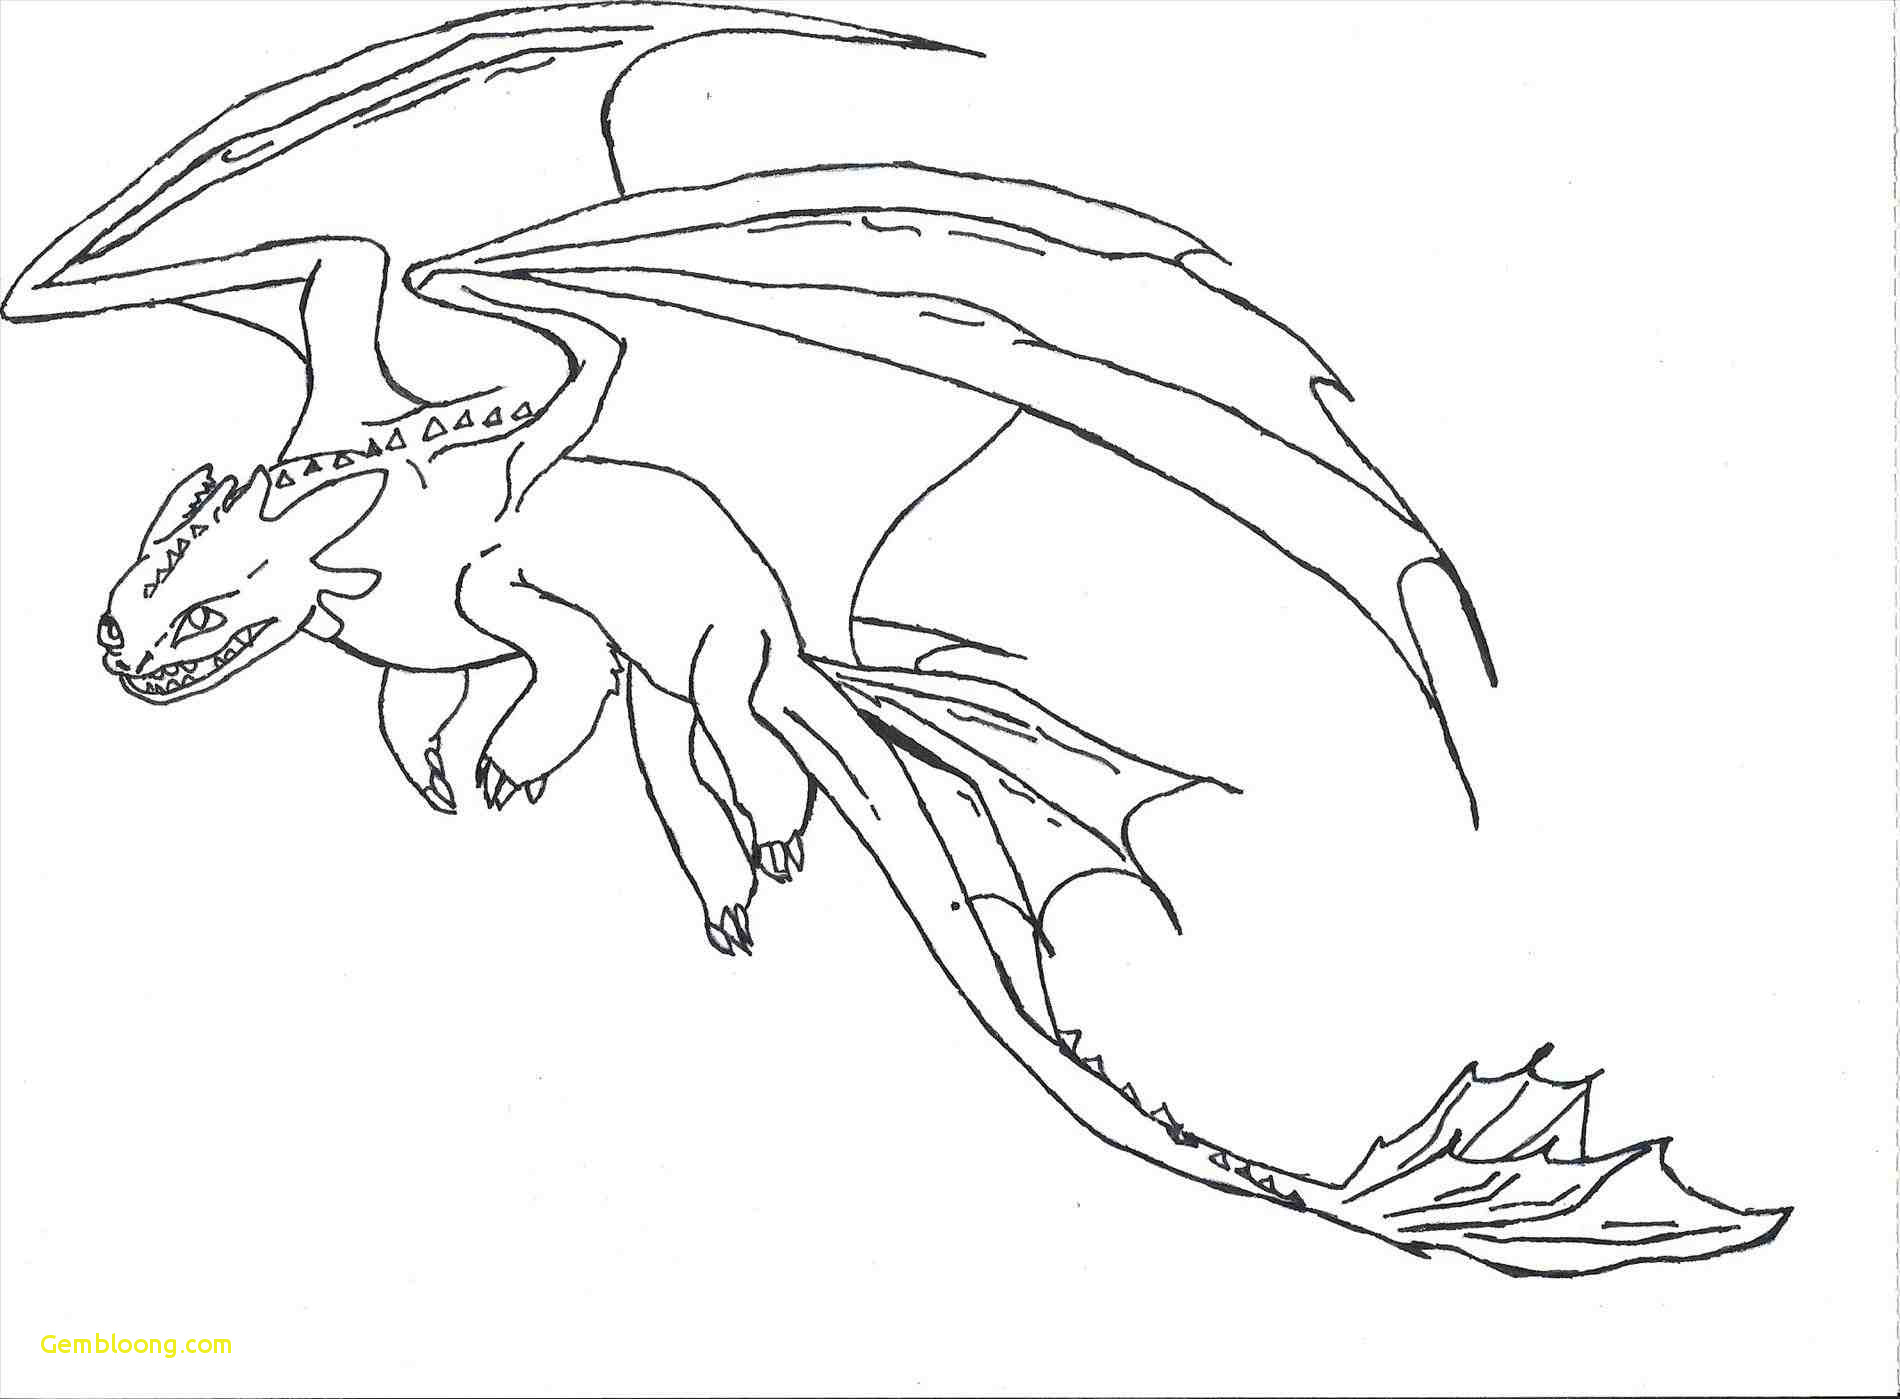 Cool Dragon Drawings For Kids / 10+ Cool Dragon Drawings for ...